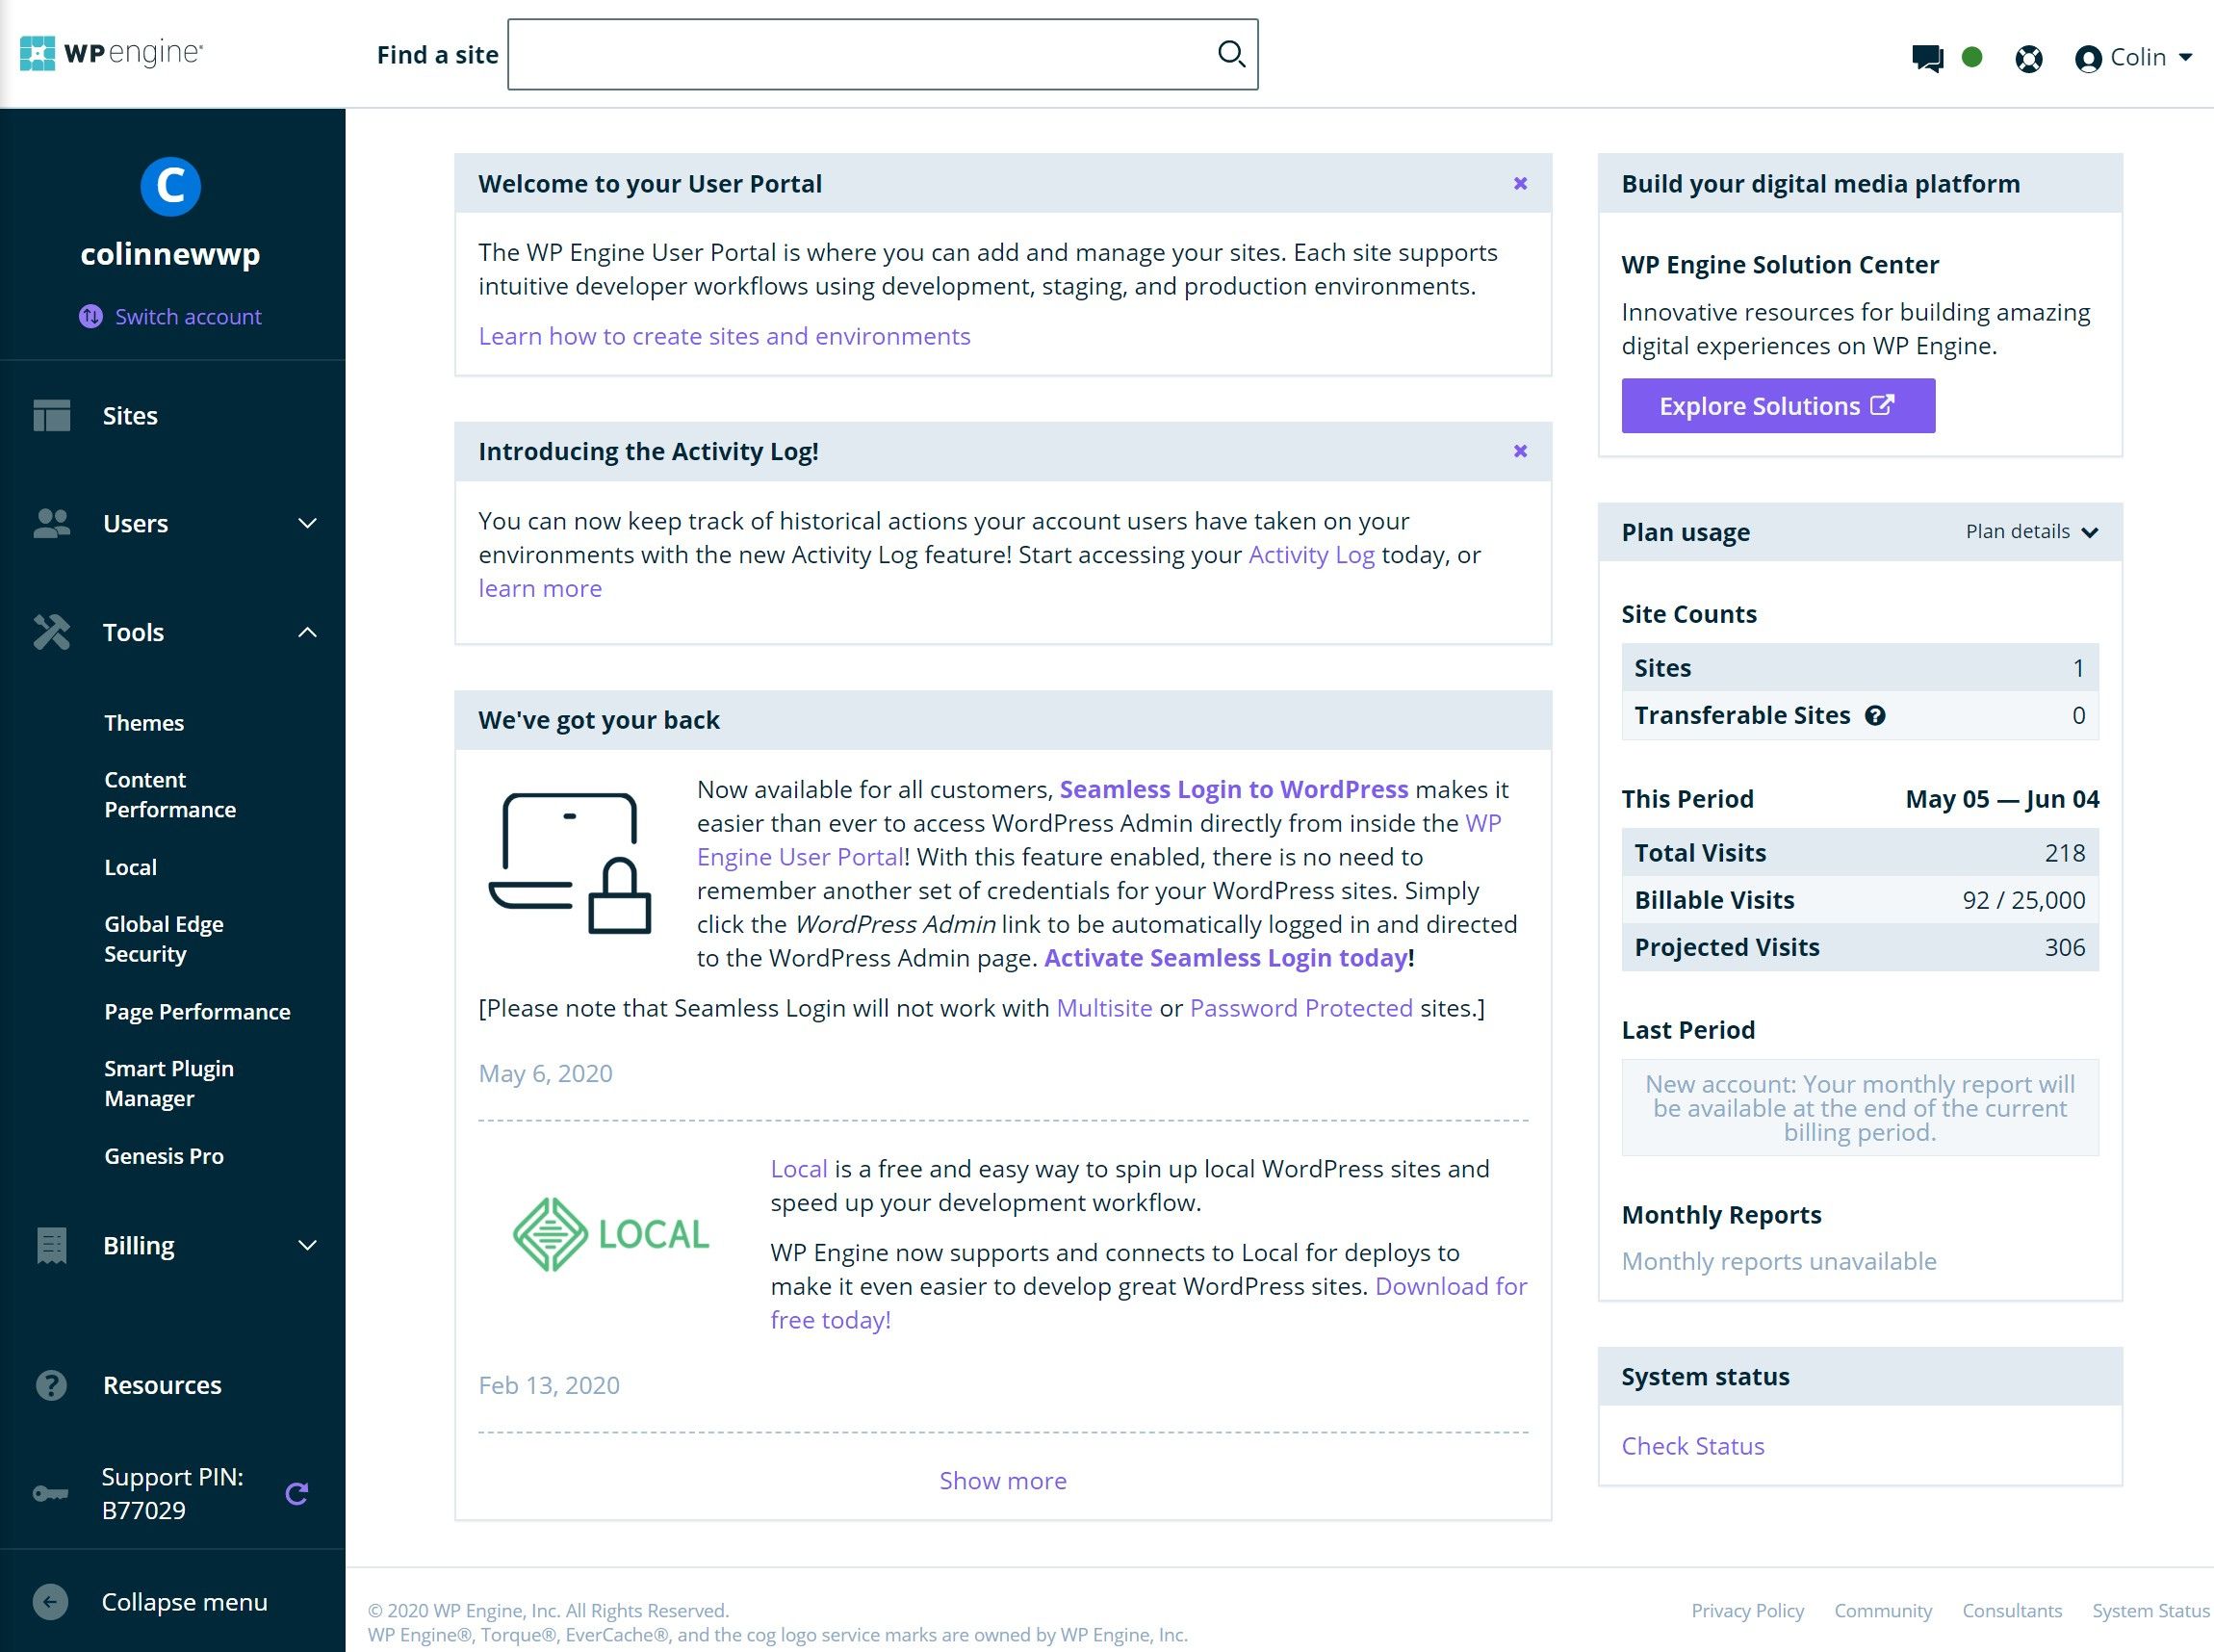 The main WP Engine dashboard page